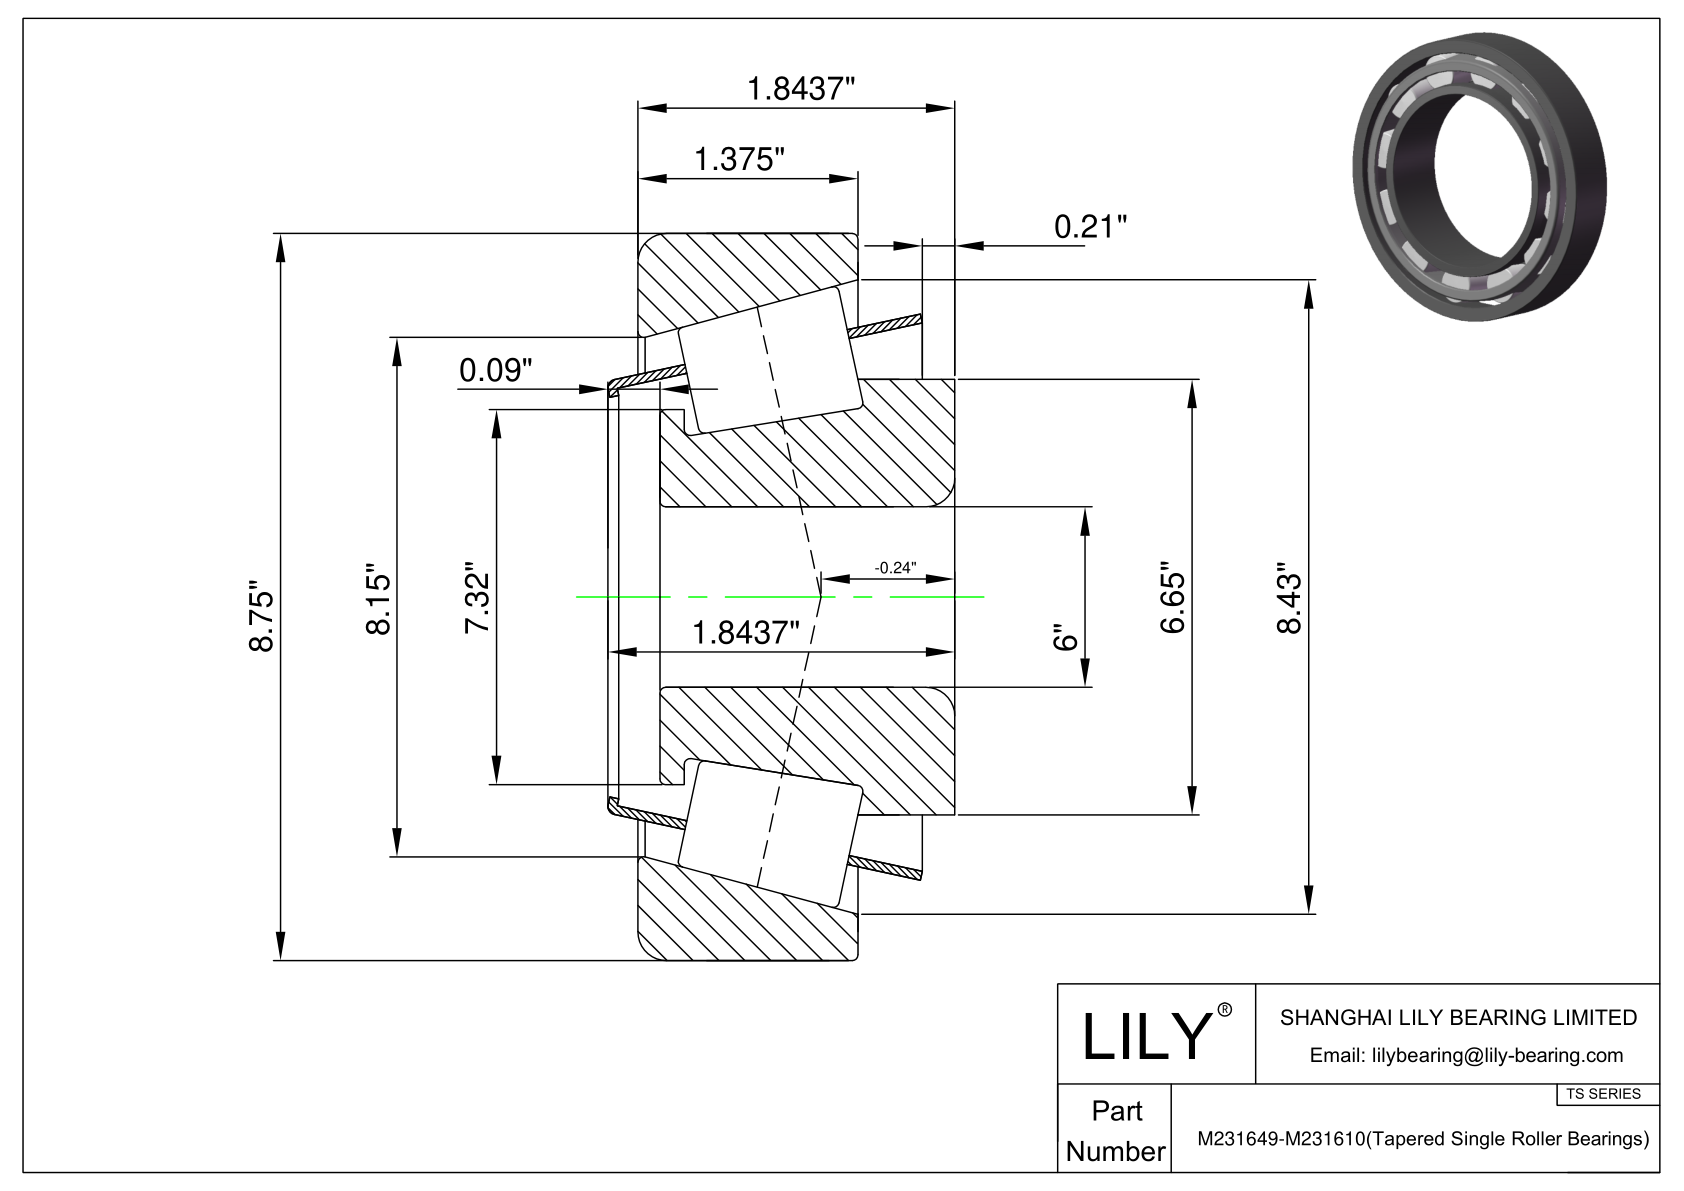 M231649-M231610 TS (Tapered Single Roller Bearings) (Imperial) cad drawing